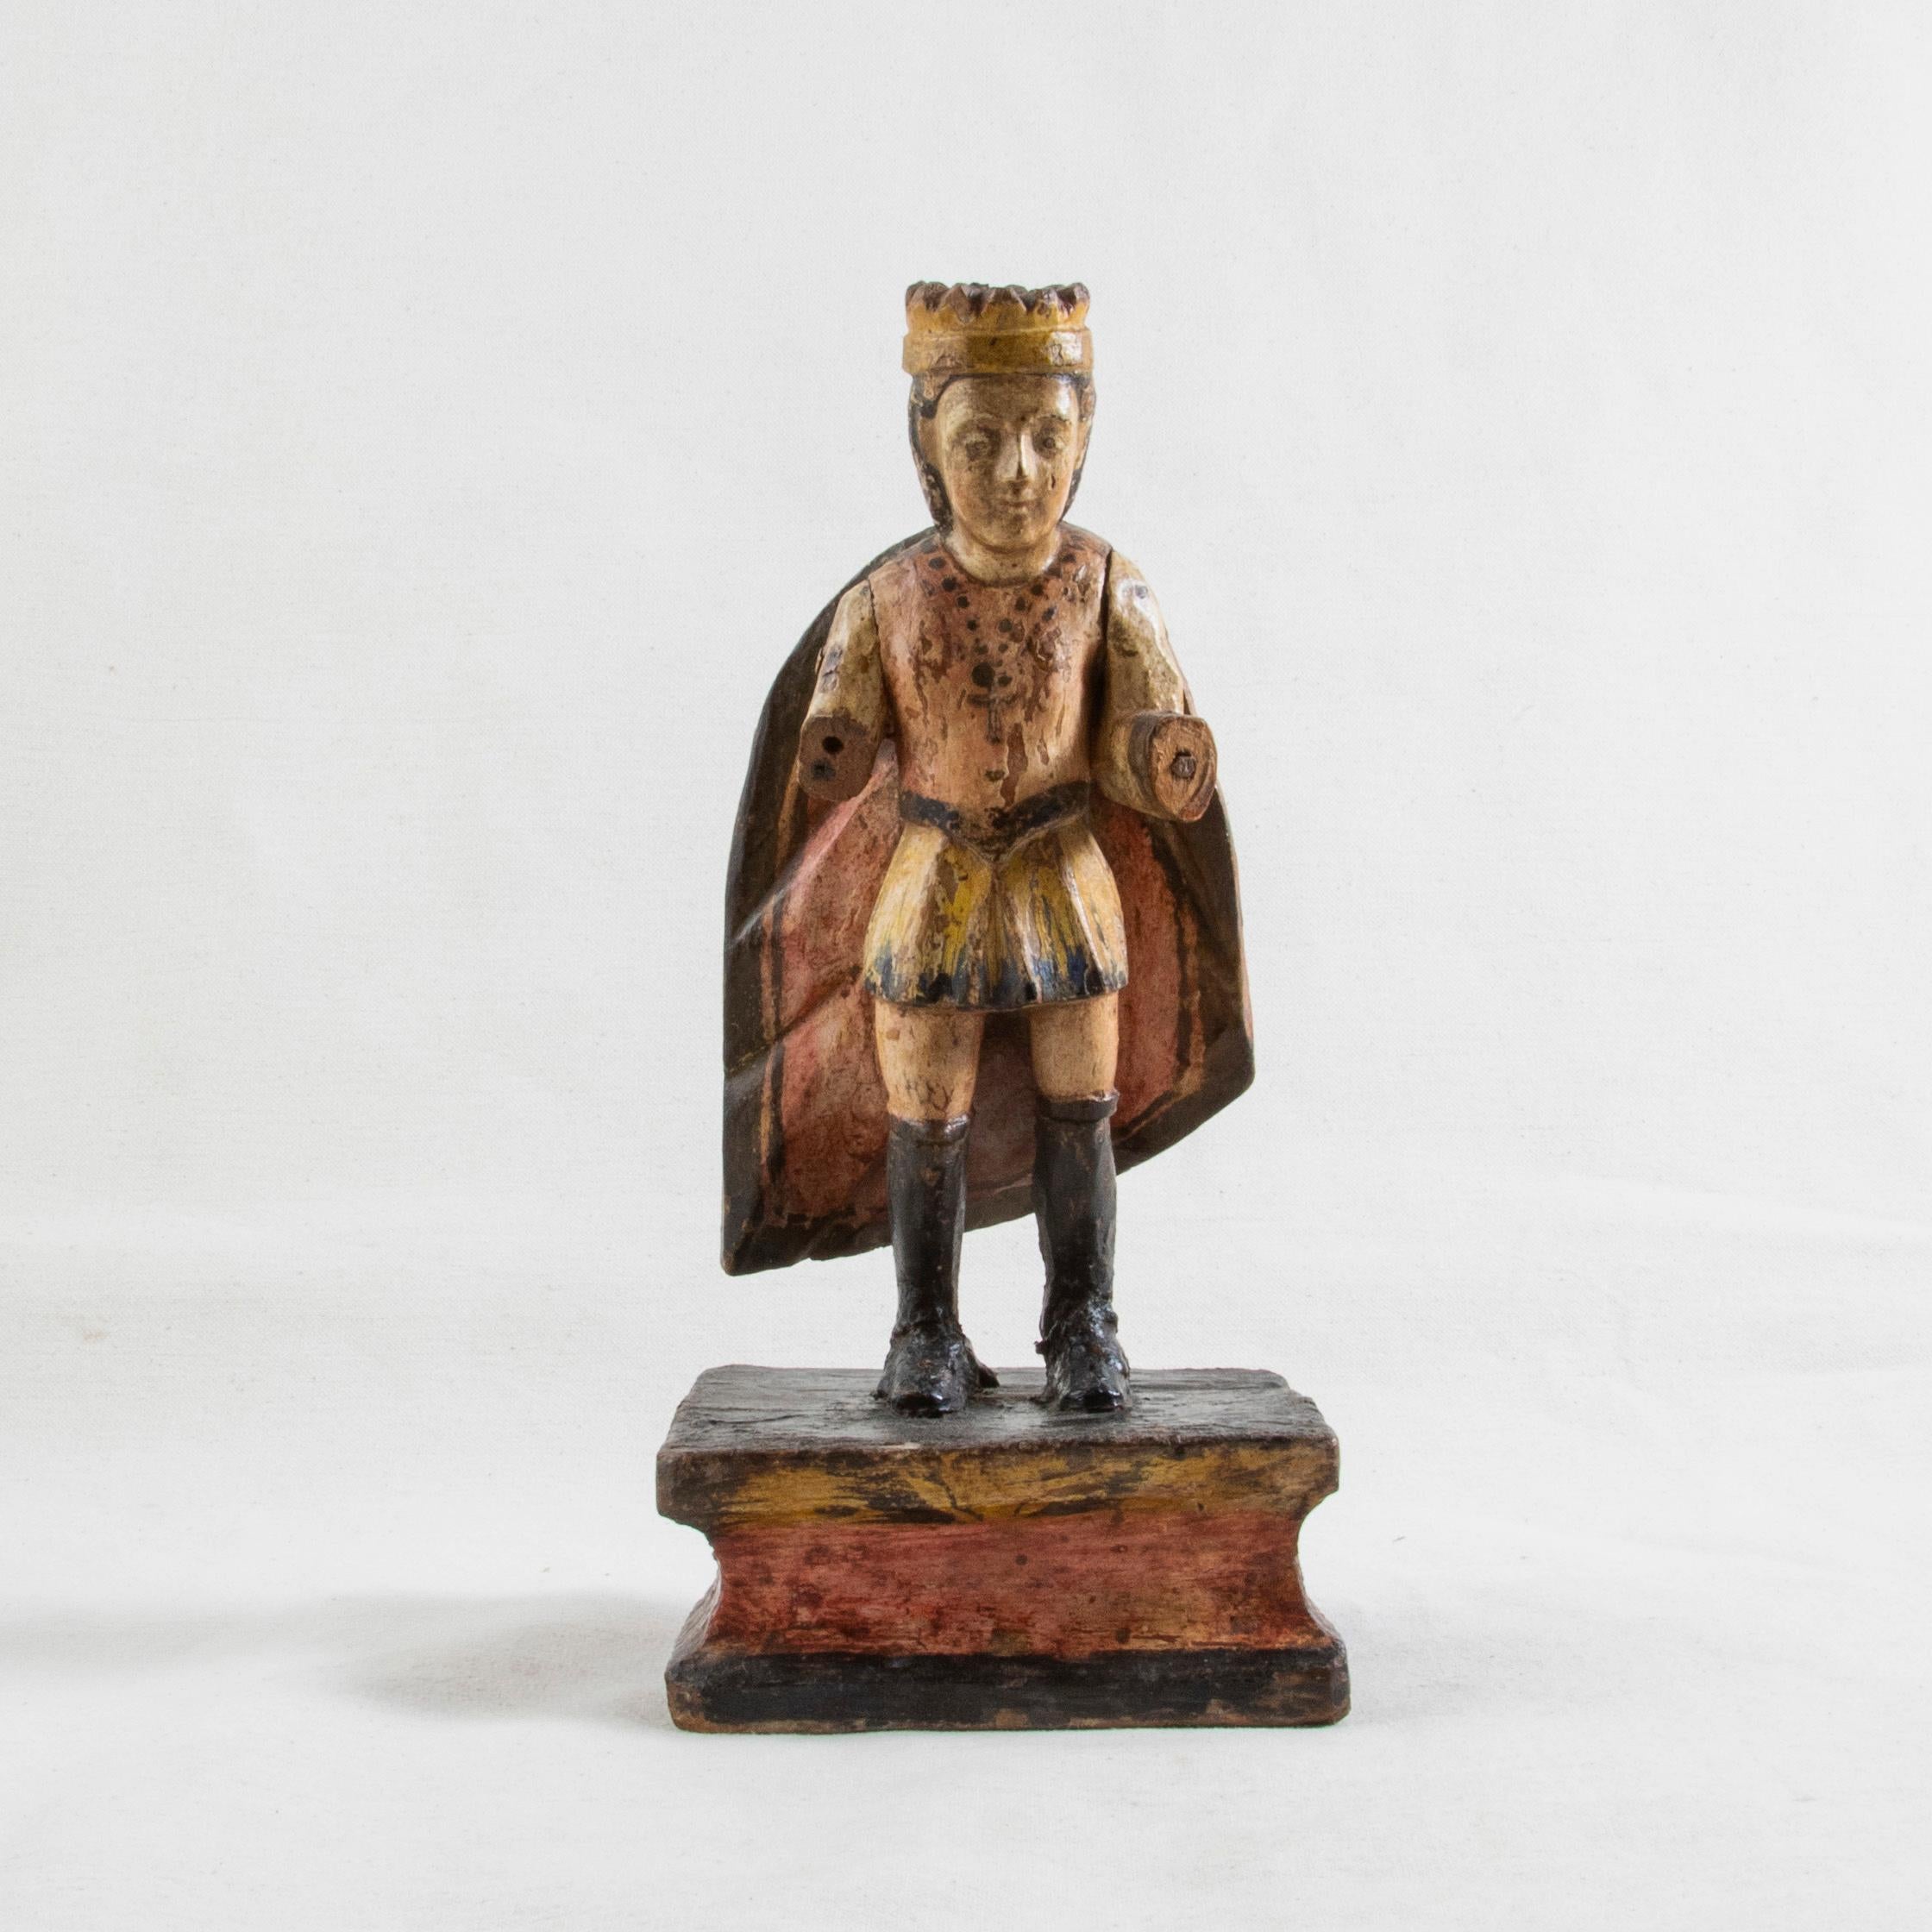 This late 18th century hand carved polychrome sculpture from Spain features the figure of a king wearing a crown and cape. The king stands in knee high boots and wears a short tunic and a cross hanging from a chain around his neck. His arms are hand